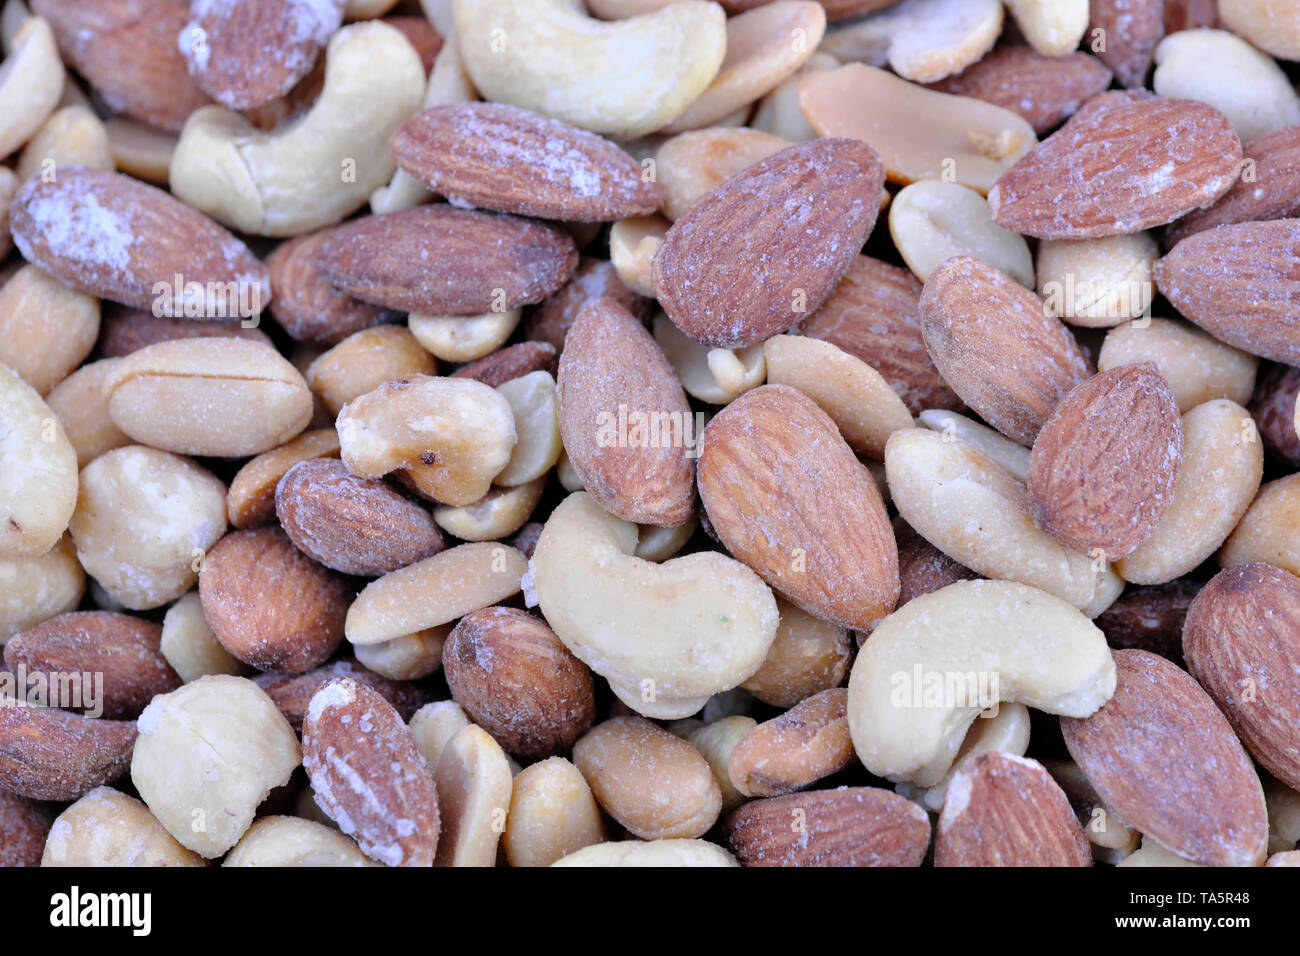 Roasted almond and cashew kernels coated with various ingredients in close-up, macro Stock Photo